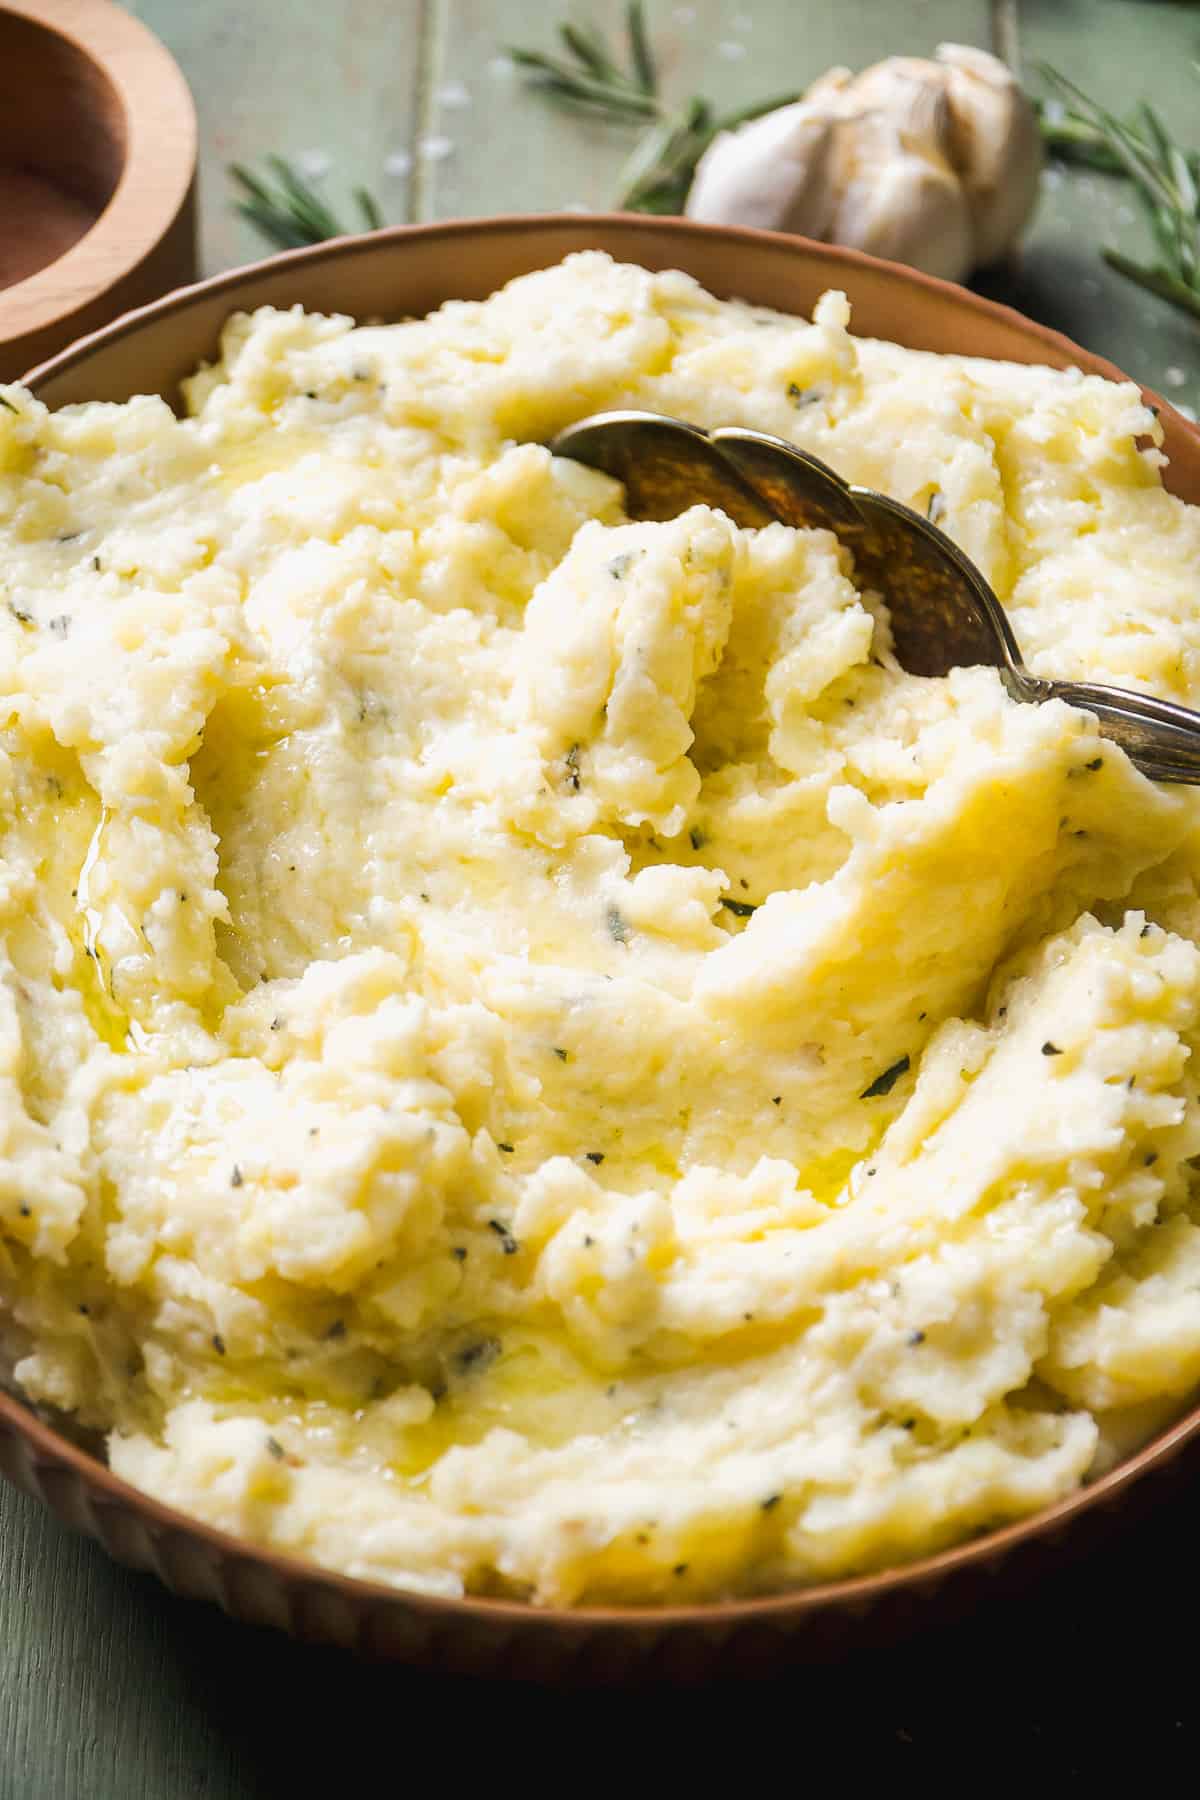 Brown bowl with garlic mashed potatoes inside and a large spoon resting inside.